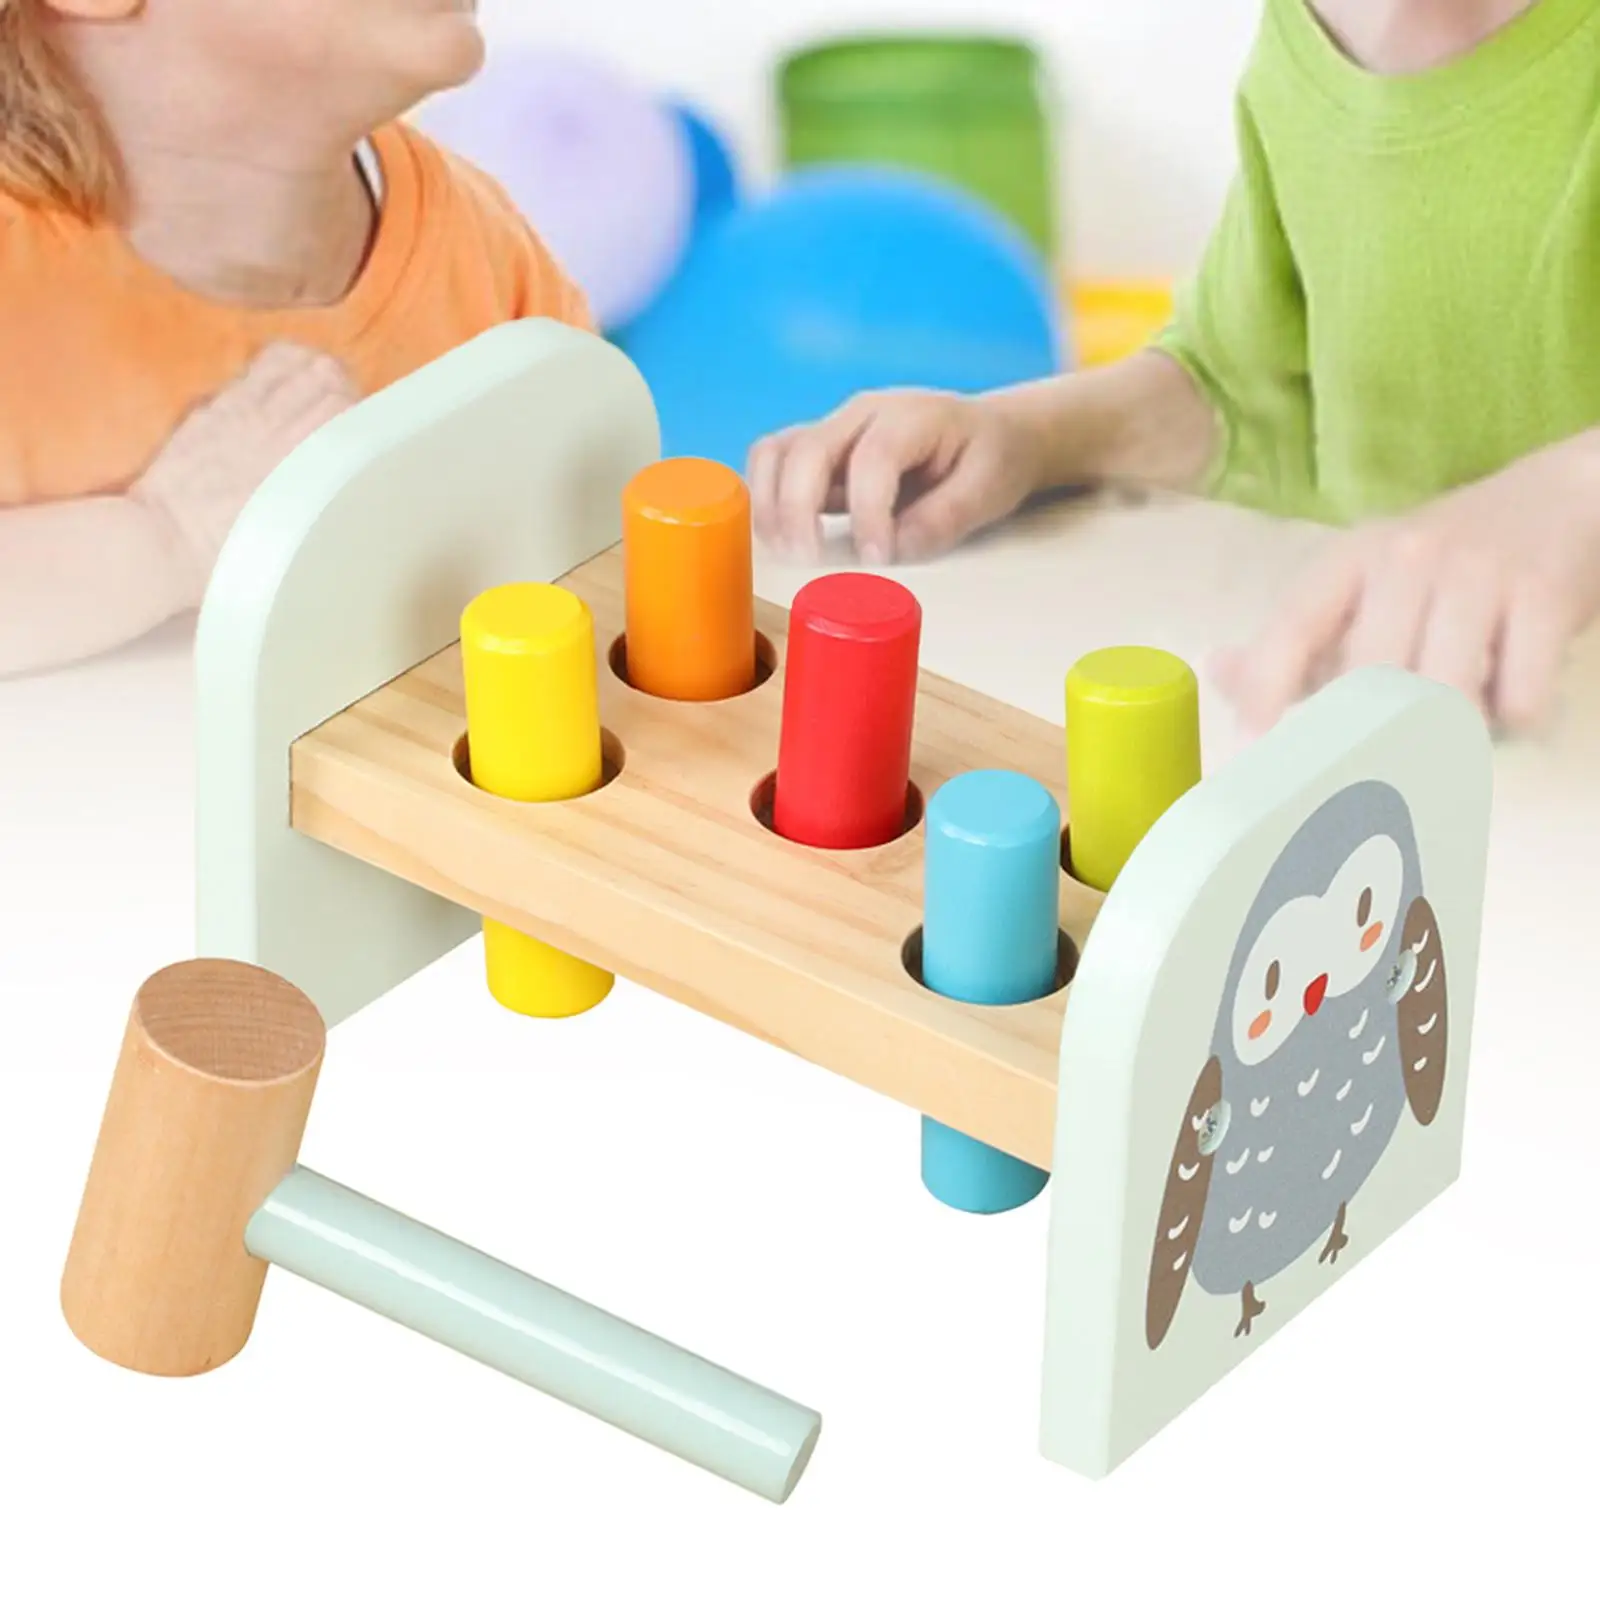 Pounding Bench Wood Toy Wooden Pounding Bench for Boys Girls